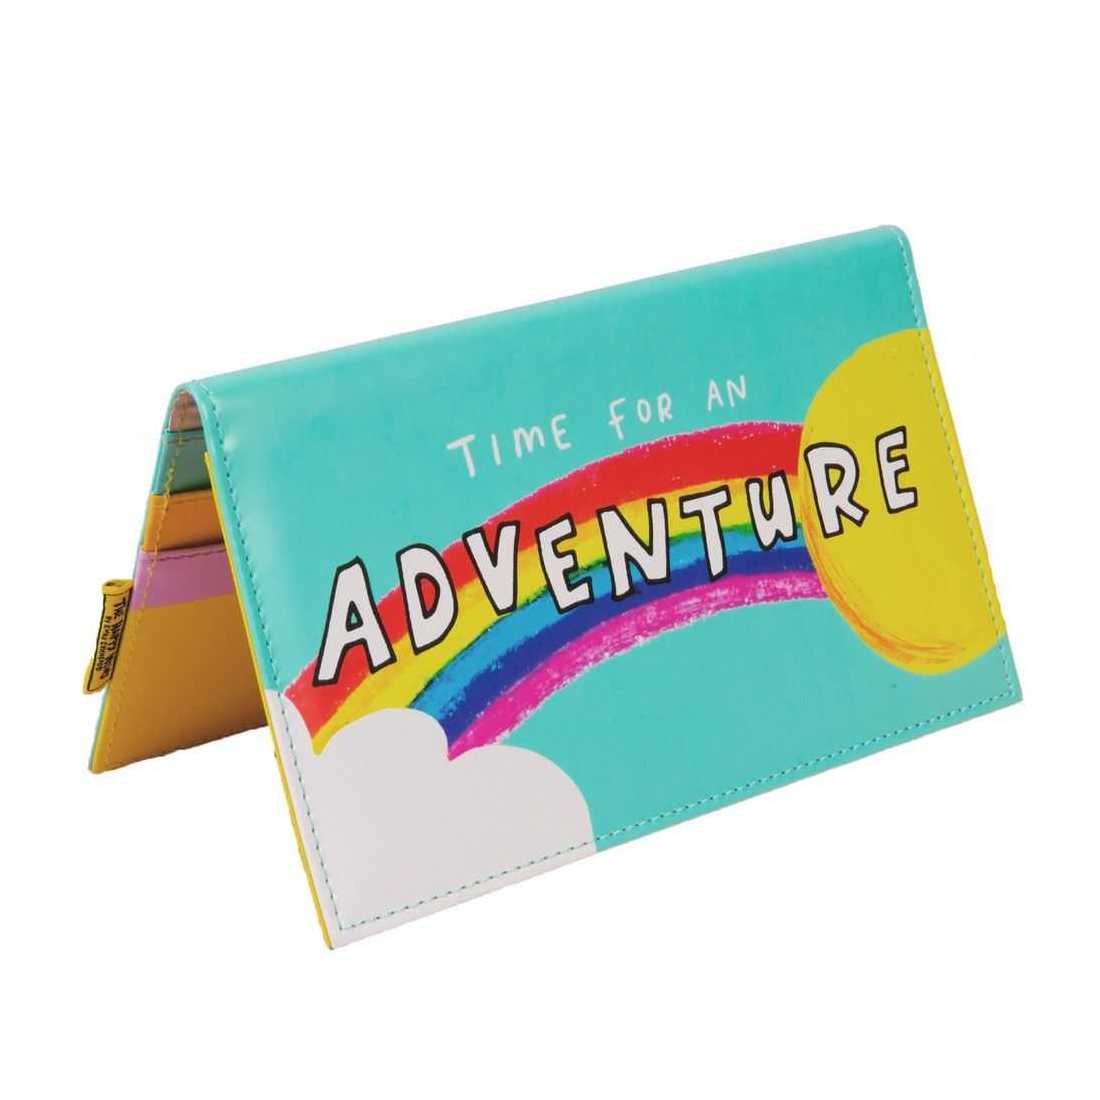 The Happy News Document Holder Lets Go On An Adventure